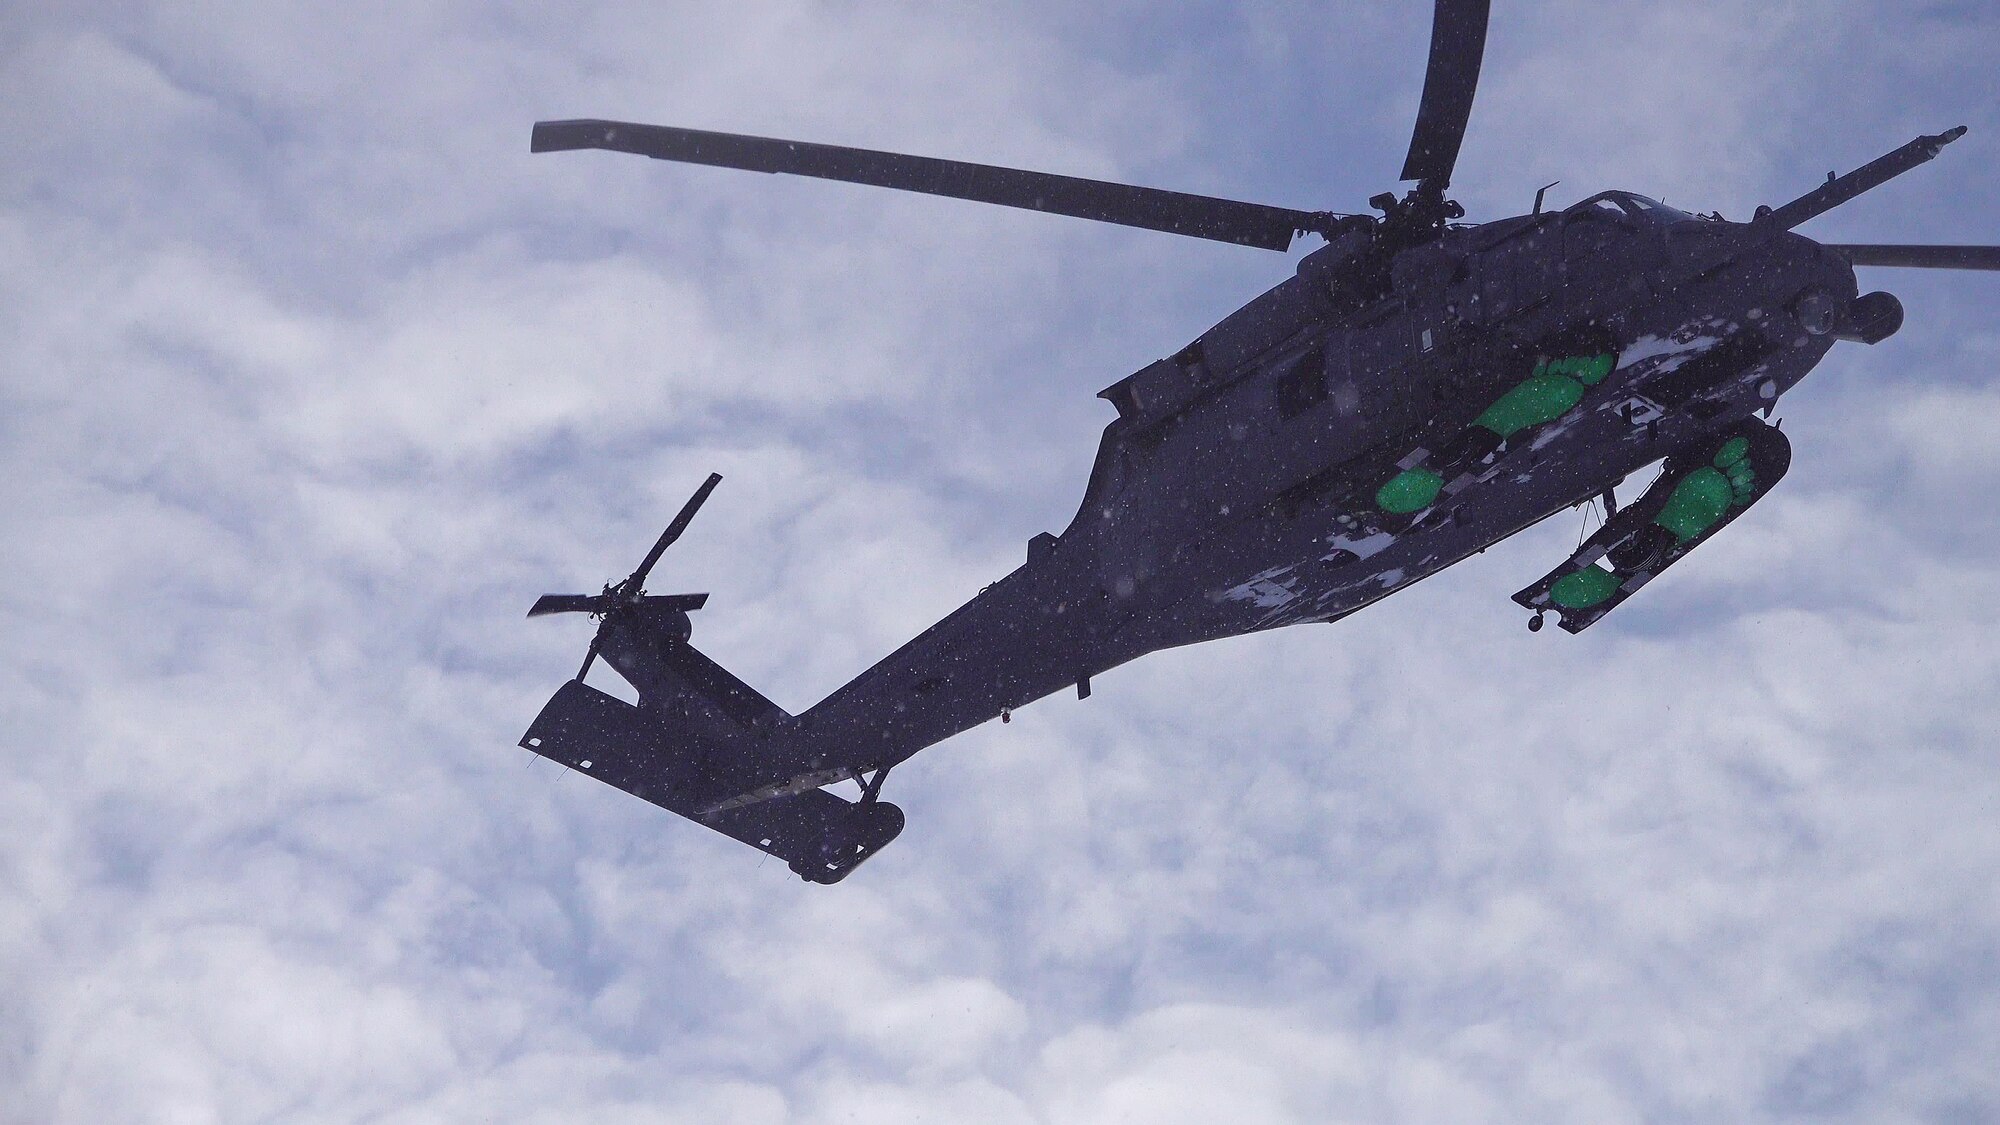 176th Wing Airmen participate in Noble Defender rescue exercise